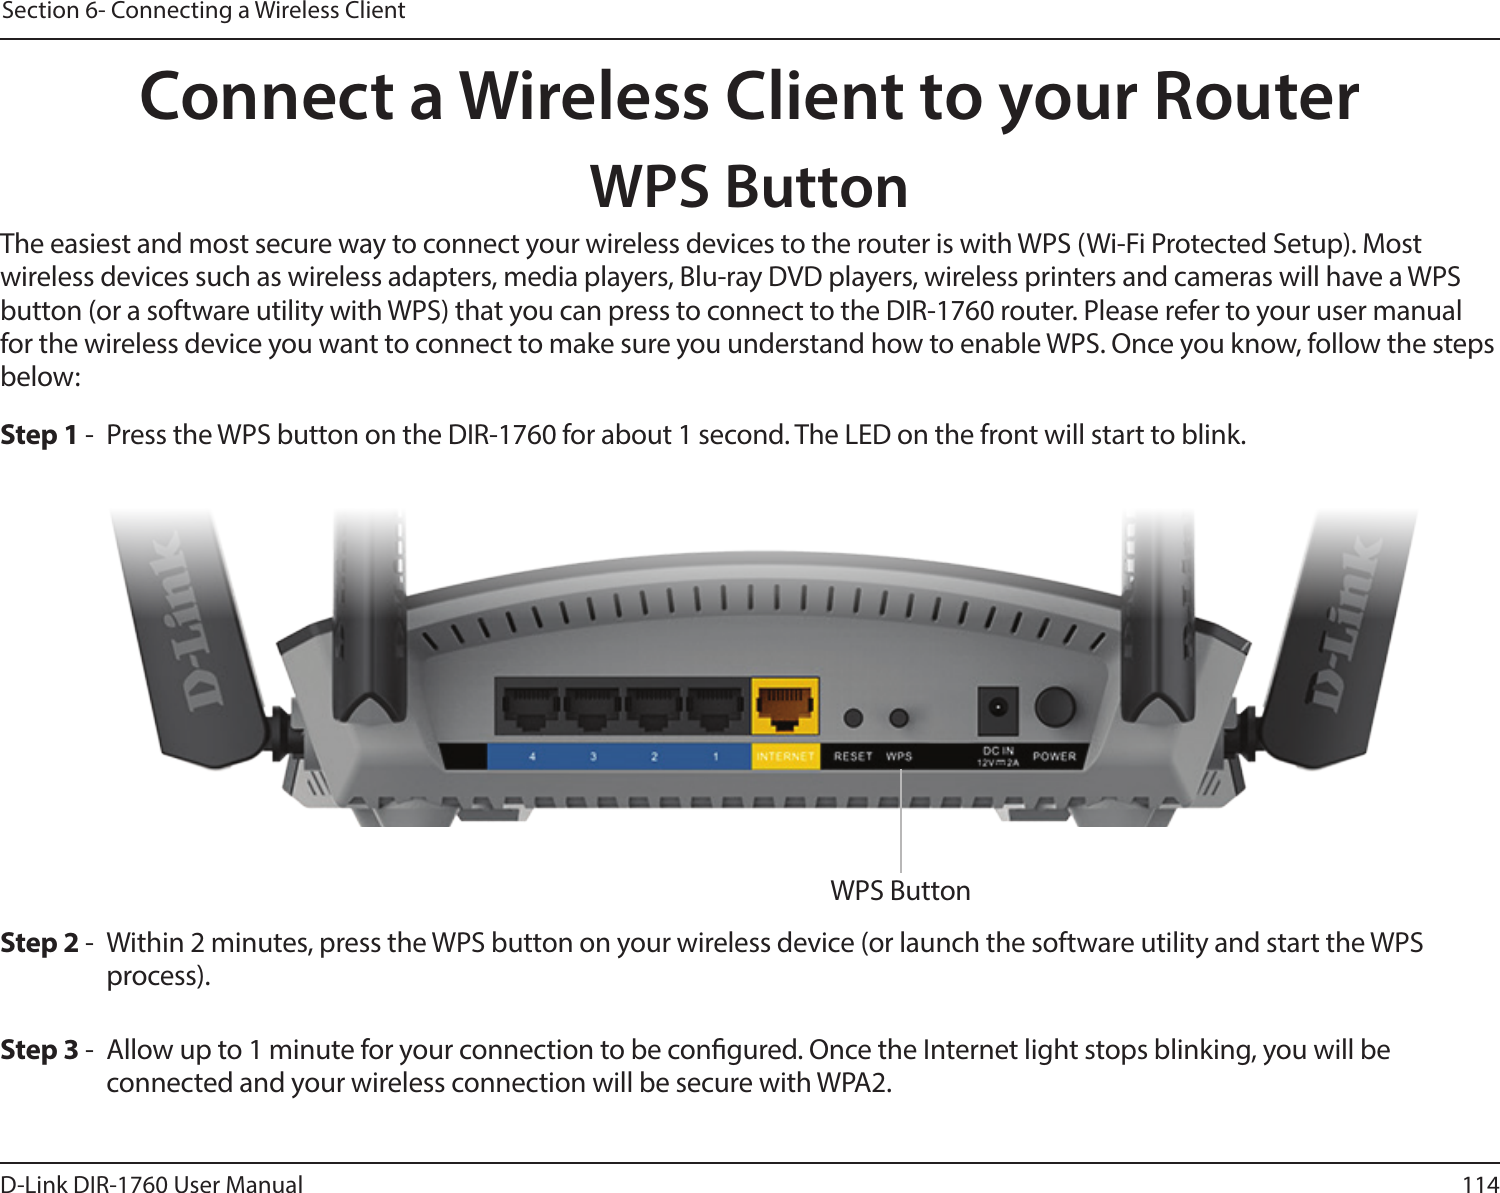 114D-Link DIR-1760 User ManualSection 6- Connecting a Wireless ClientConnect a Wireless Client to your RouterWPS ButtonStep 2 -  Within 2 minutes, press the WPS button on your wireless device (or launch the software utility and start the WPS process).The easiest and most secure way to connect your wireless devices to the router is with WPS (Wi-Fi Protected Setup). Most wireless devices such as wireless adapters, media players, Blu-ray DVD players, wireless printers and cameras will have a WPS button (or a software utility with WPS) that you can press to connect to the DIR-1760 router. Please refer to your user manual for the wireless device you want to connect to make sure you understand how to enable WPS. Once you know, follow the steps below:Step 1 -  Press the WPS button on the DIR-1760 for about 1 second. The LED on the front will start to blink.Step 3 -  Allow up to 1 minute for your connection to be congured. Once the Internet light stops blinking, you will be connected and your wireless connection will be secure with WPA2.WPS Button